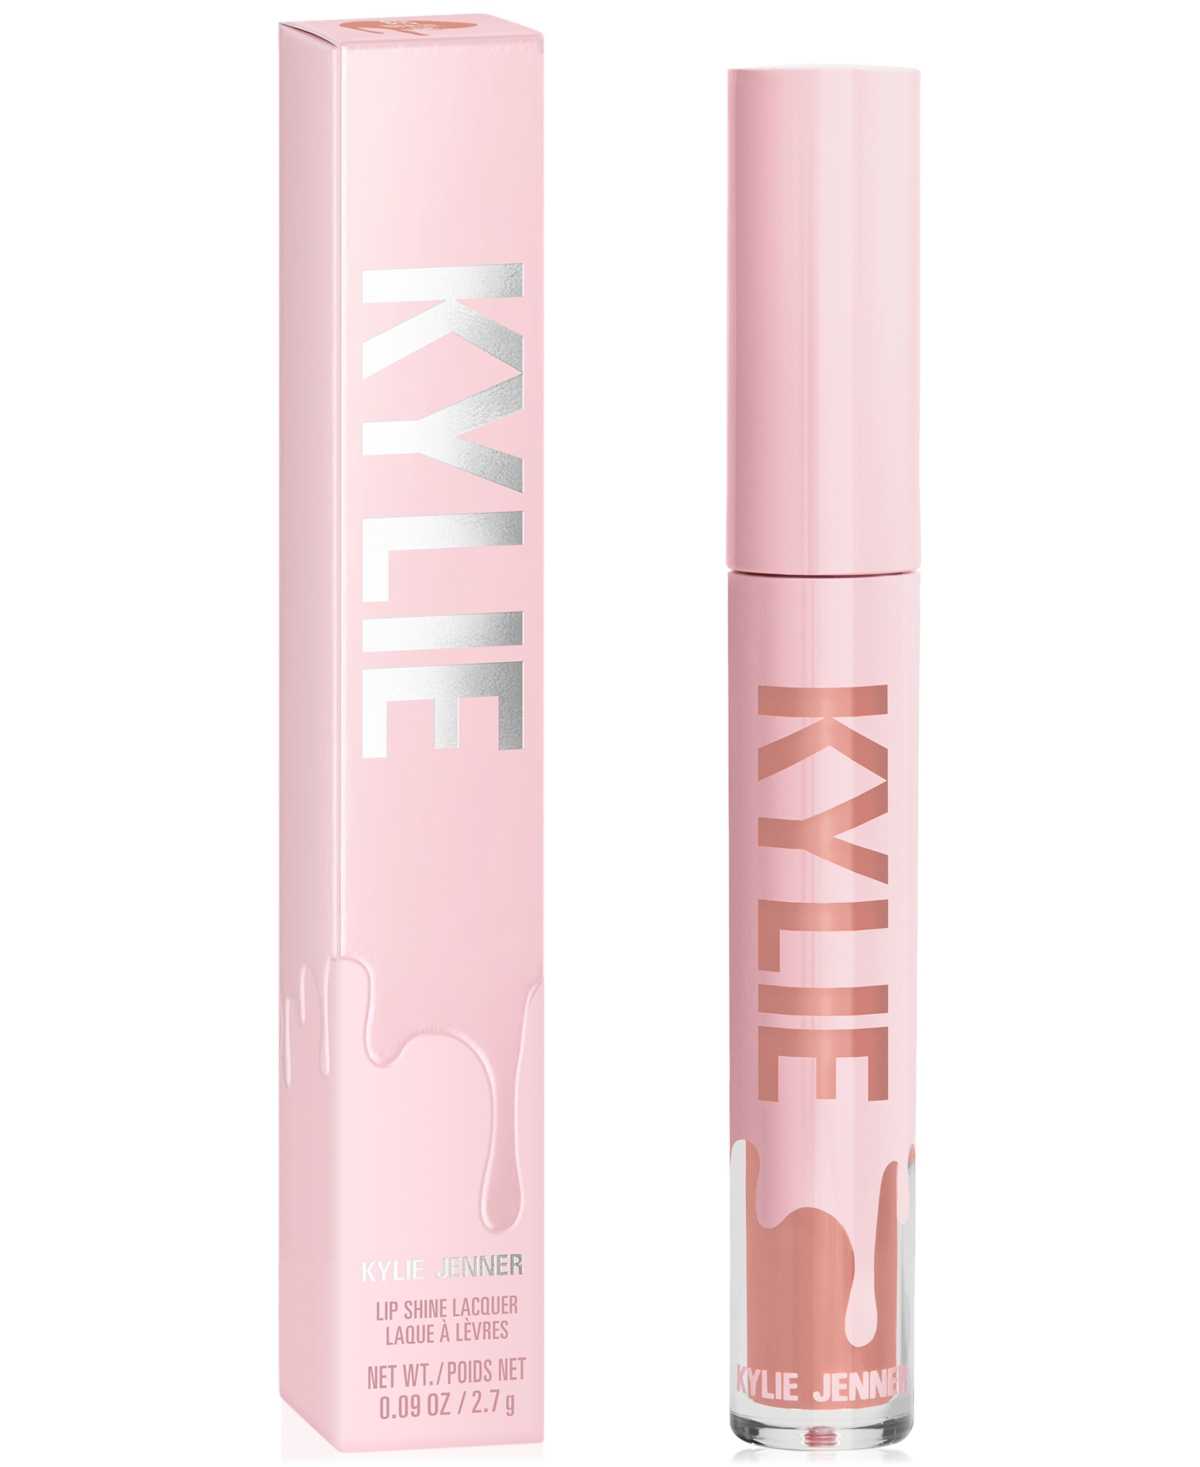 Kylie Cosmetics Lip Shine Lacquer In Youre Cute Jeans